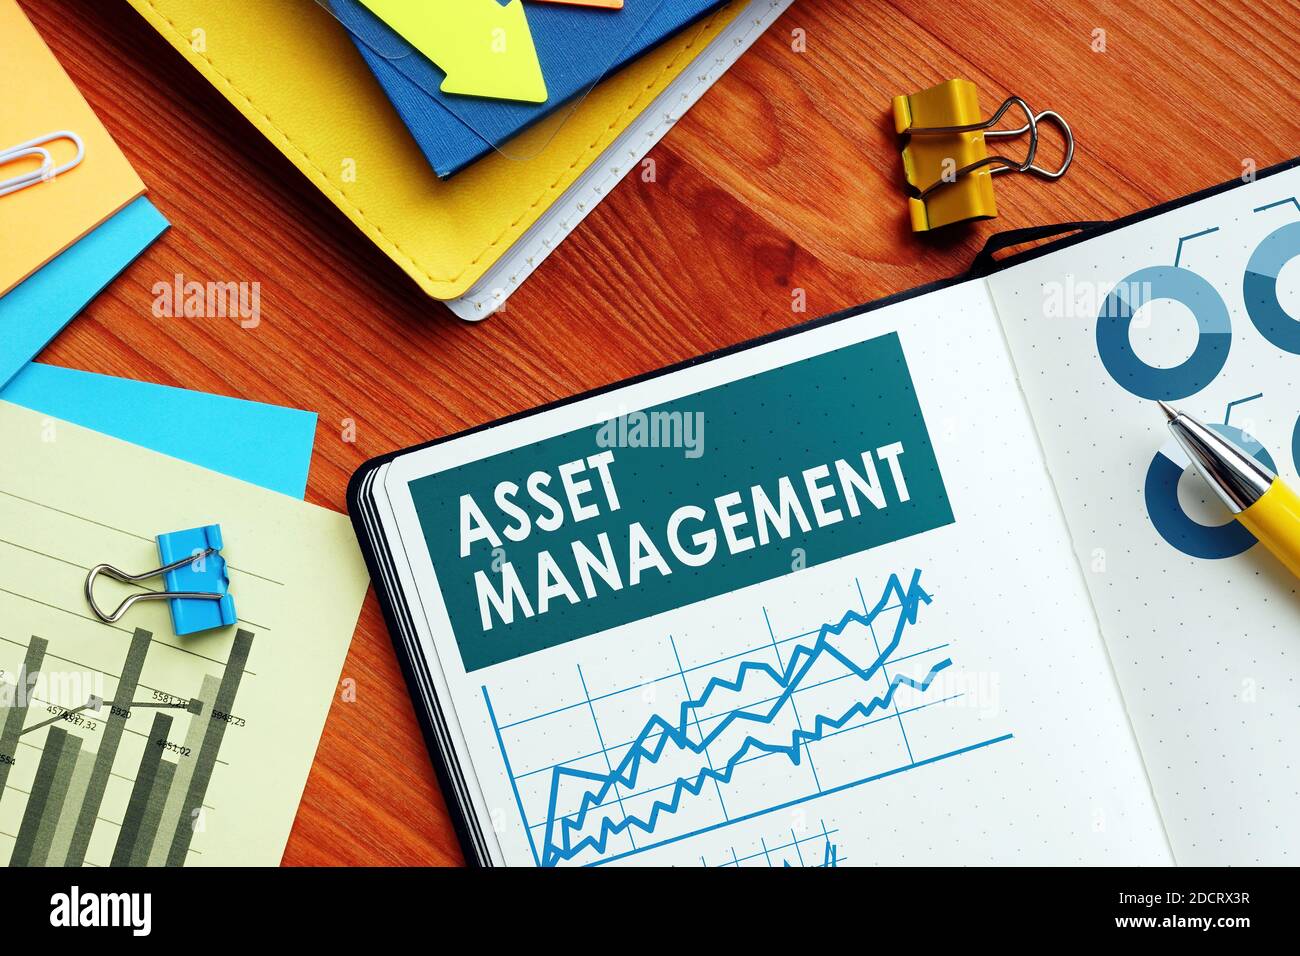 Asset Management papers with charts and graphs. Stock Photo